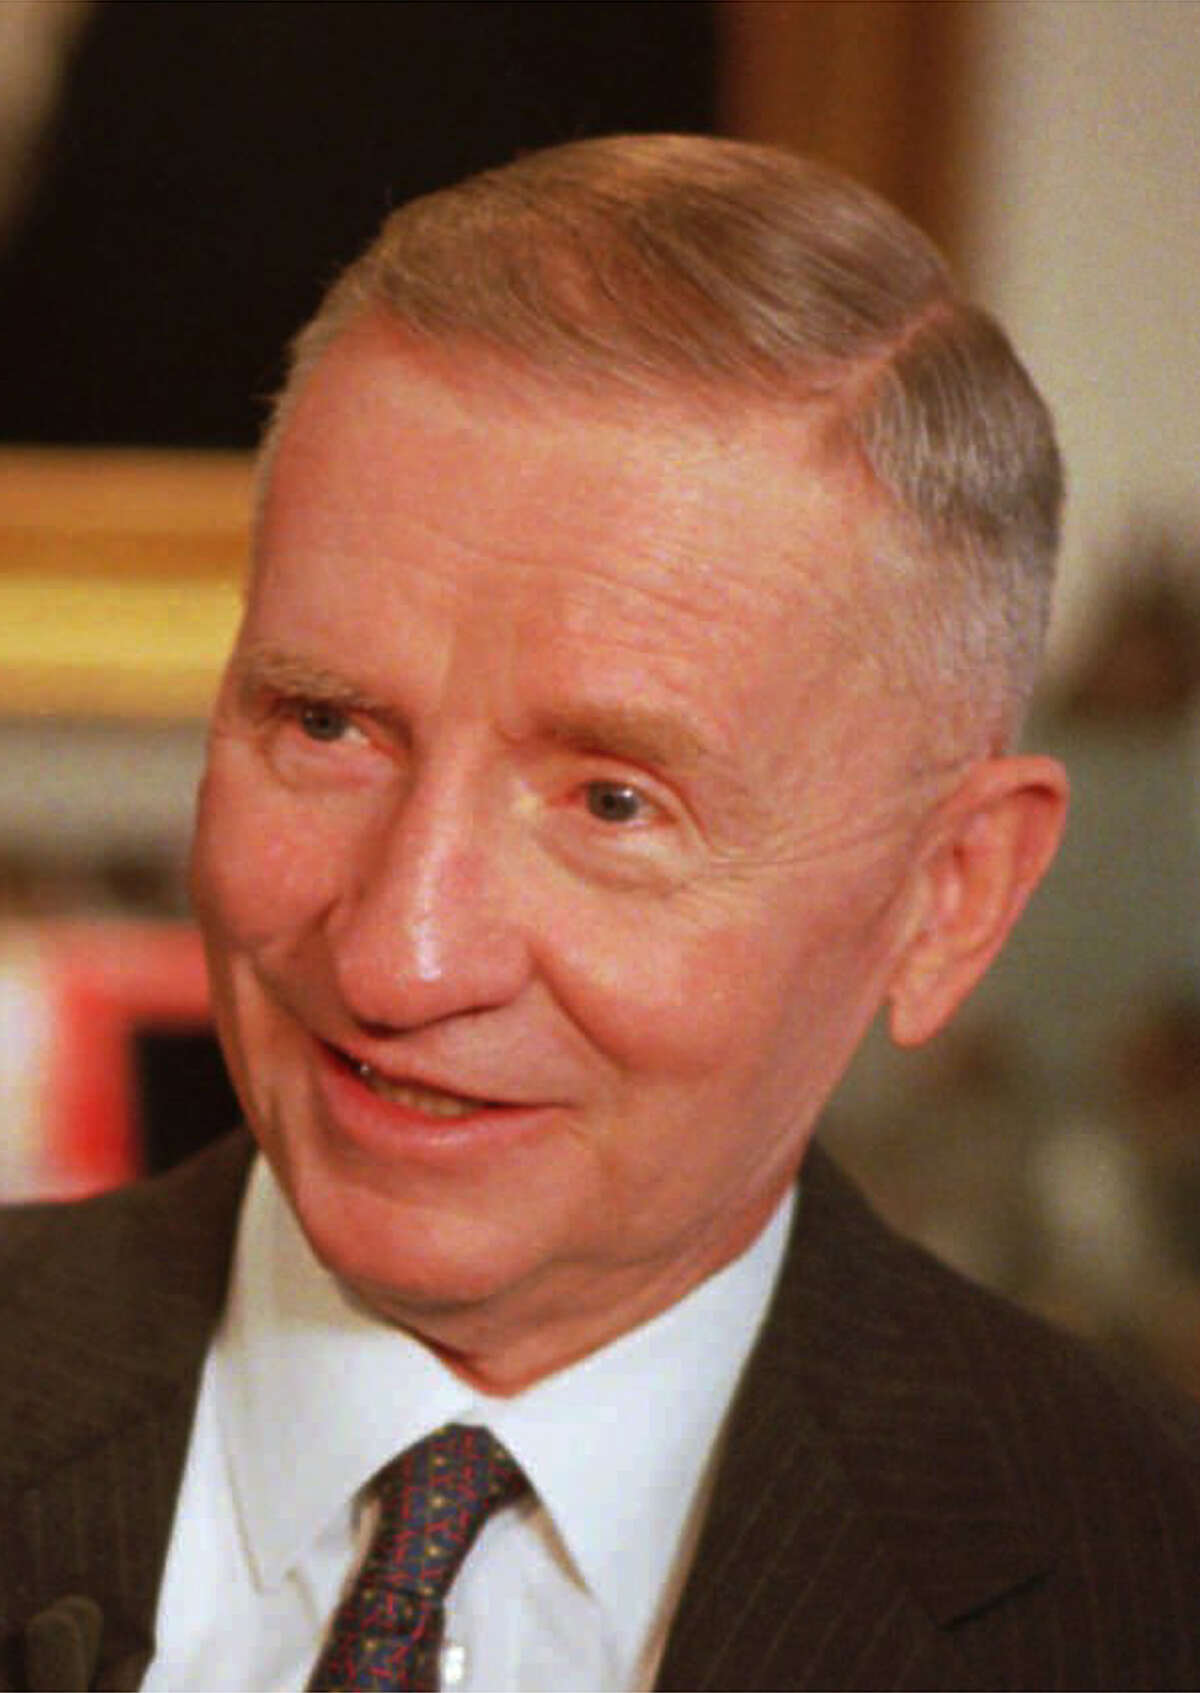 Billionaire Ross Perot won nearly 19 percent of the presidential vote in 1992.